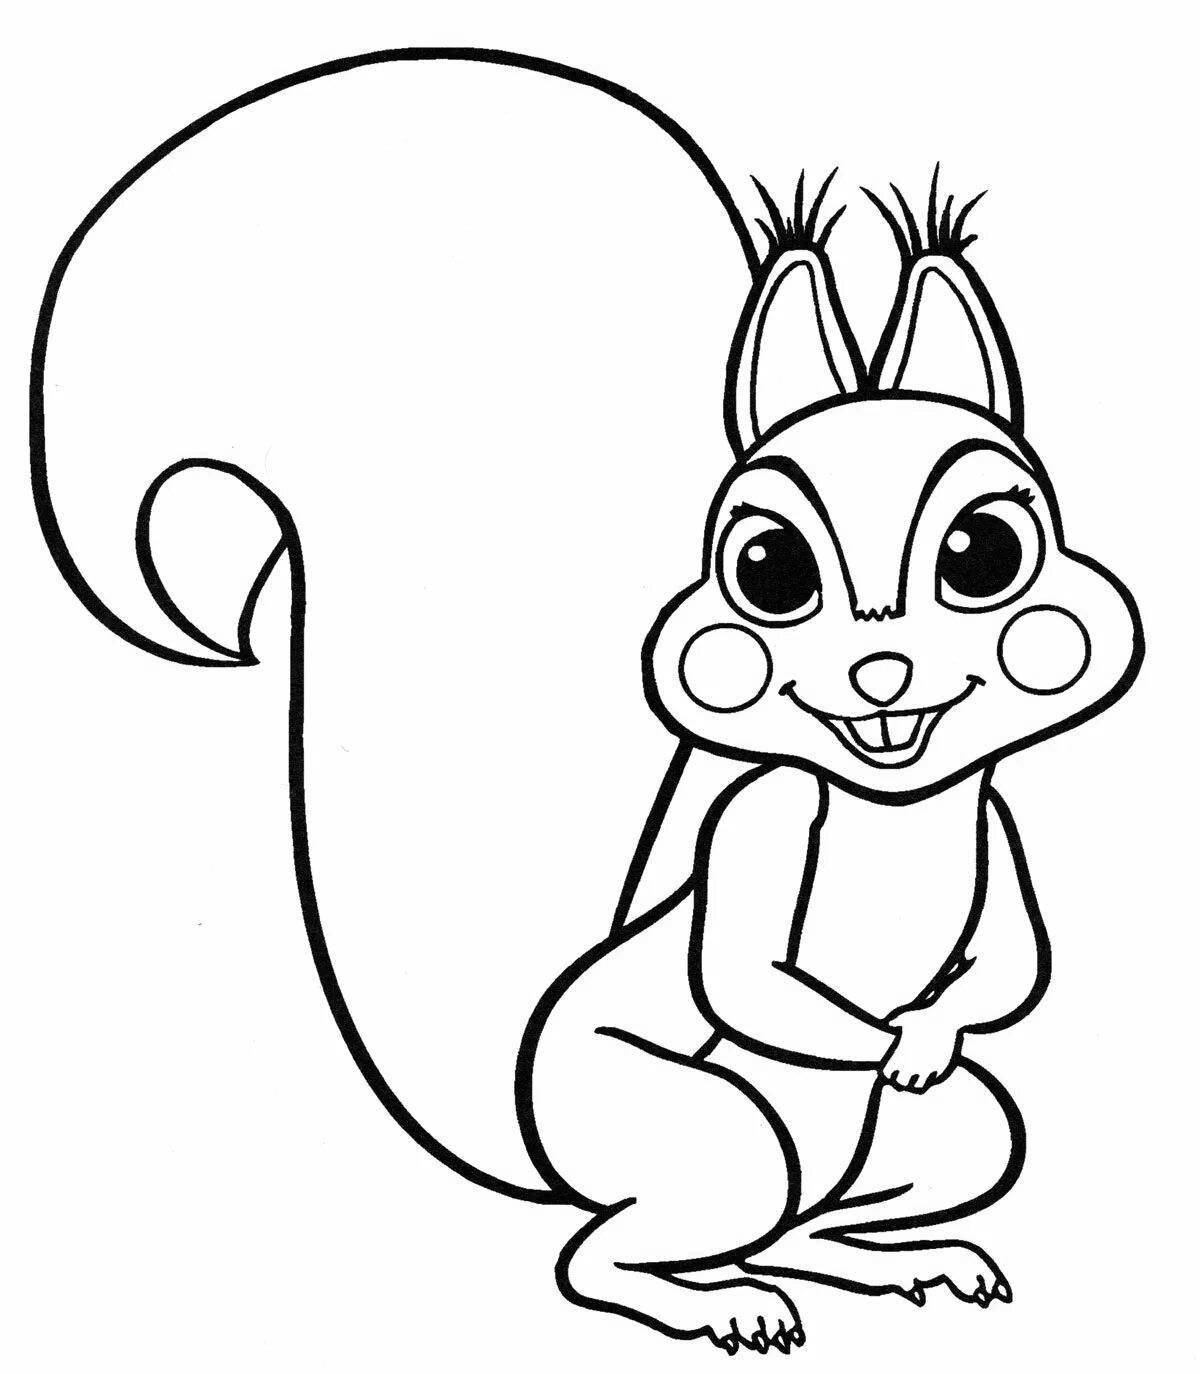 Animated drawing of a squirrel